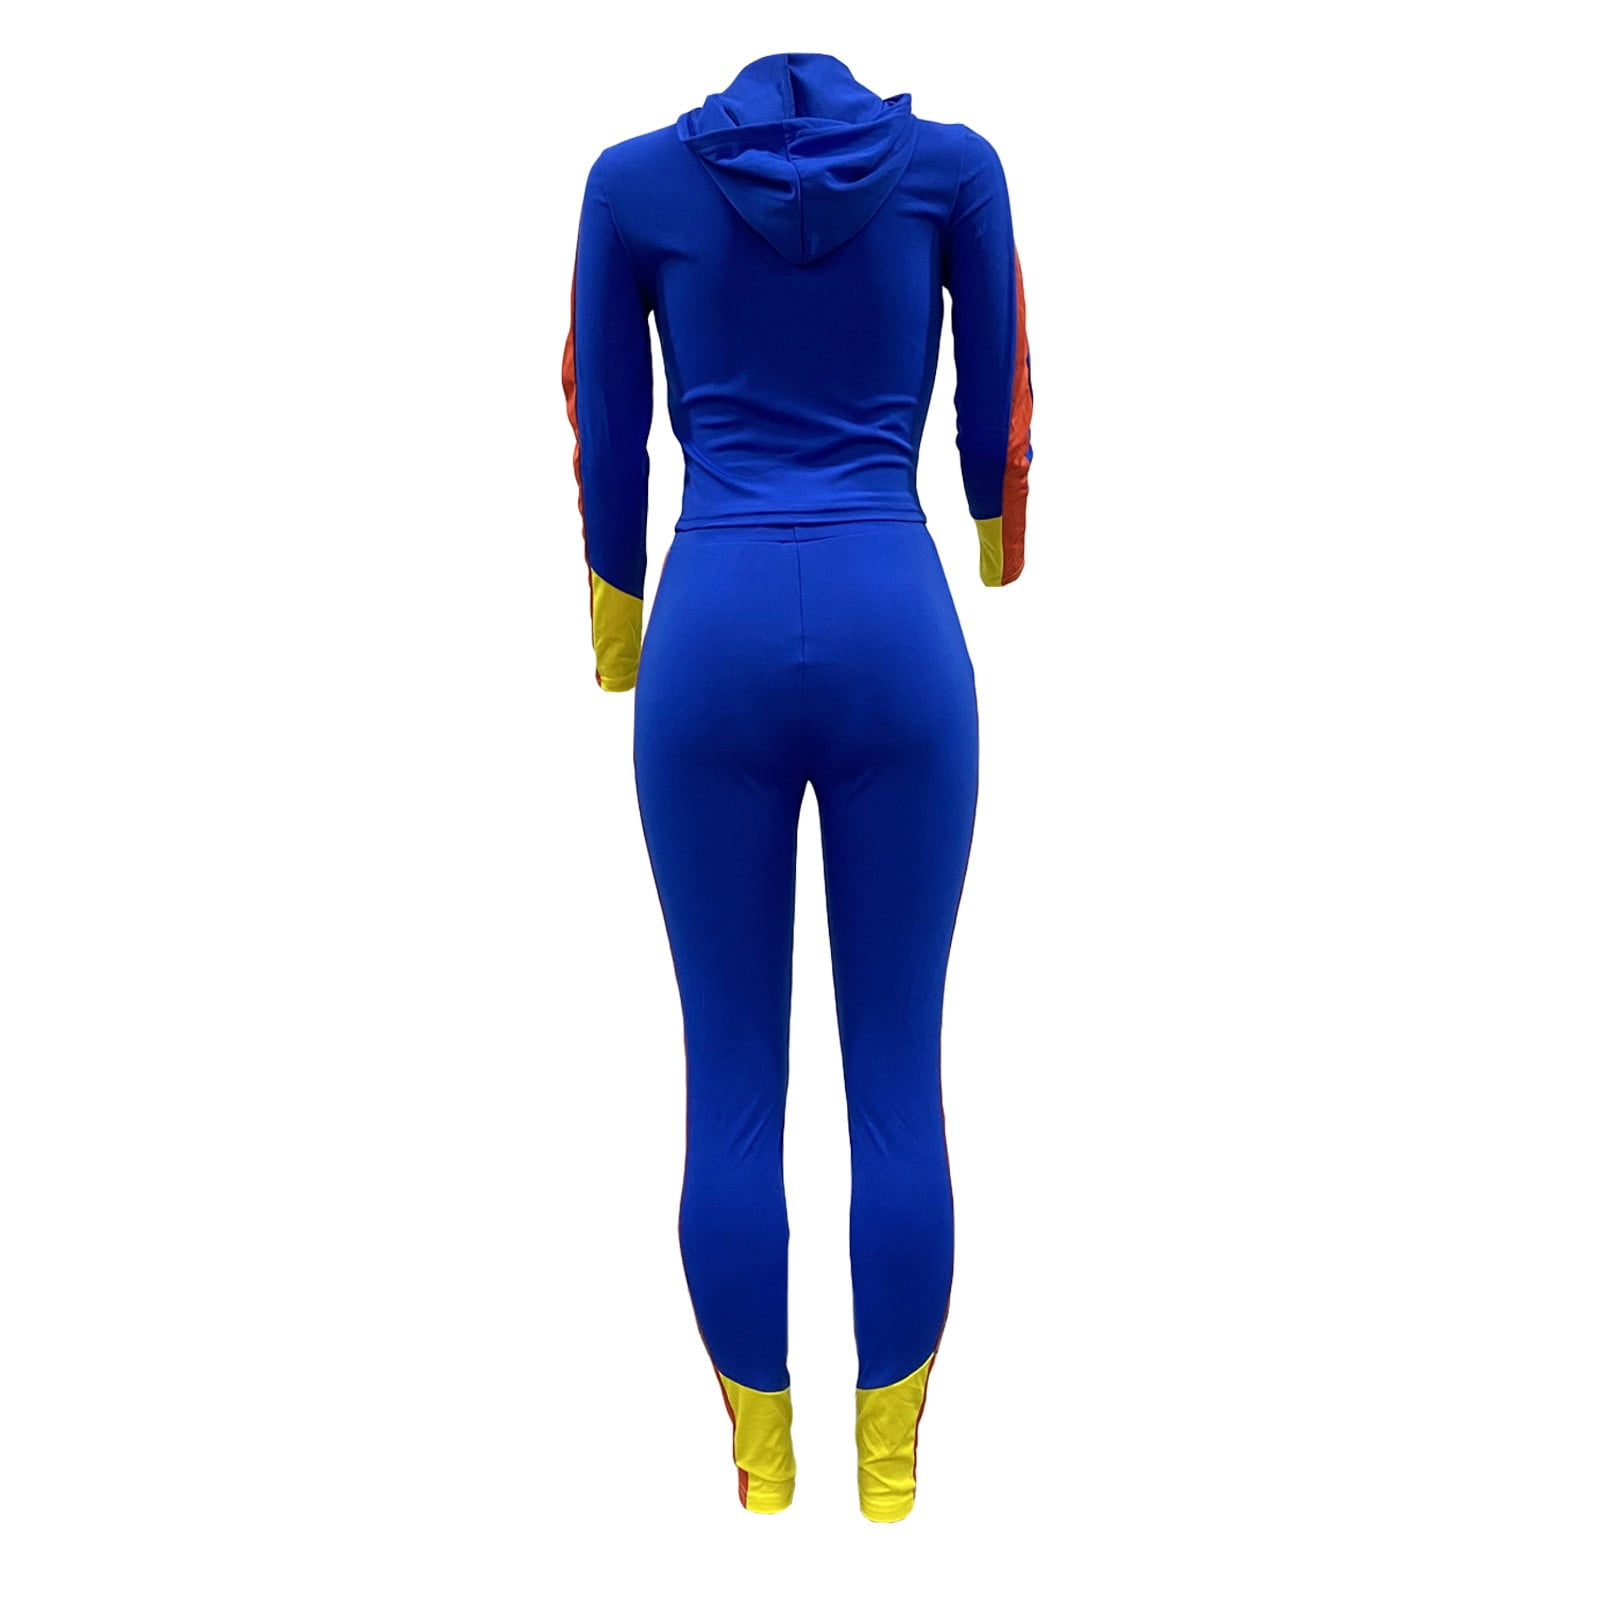 TOWED22 Holiday Outfits For Women,Women's Casual 2 Piece Tracksuit Outfit  Ribbed Crop Top Jogger Pants Matching Sets Sweatsuit(Blue,XL)